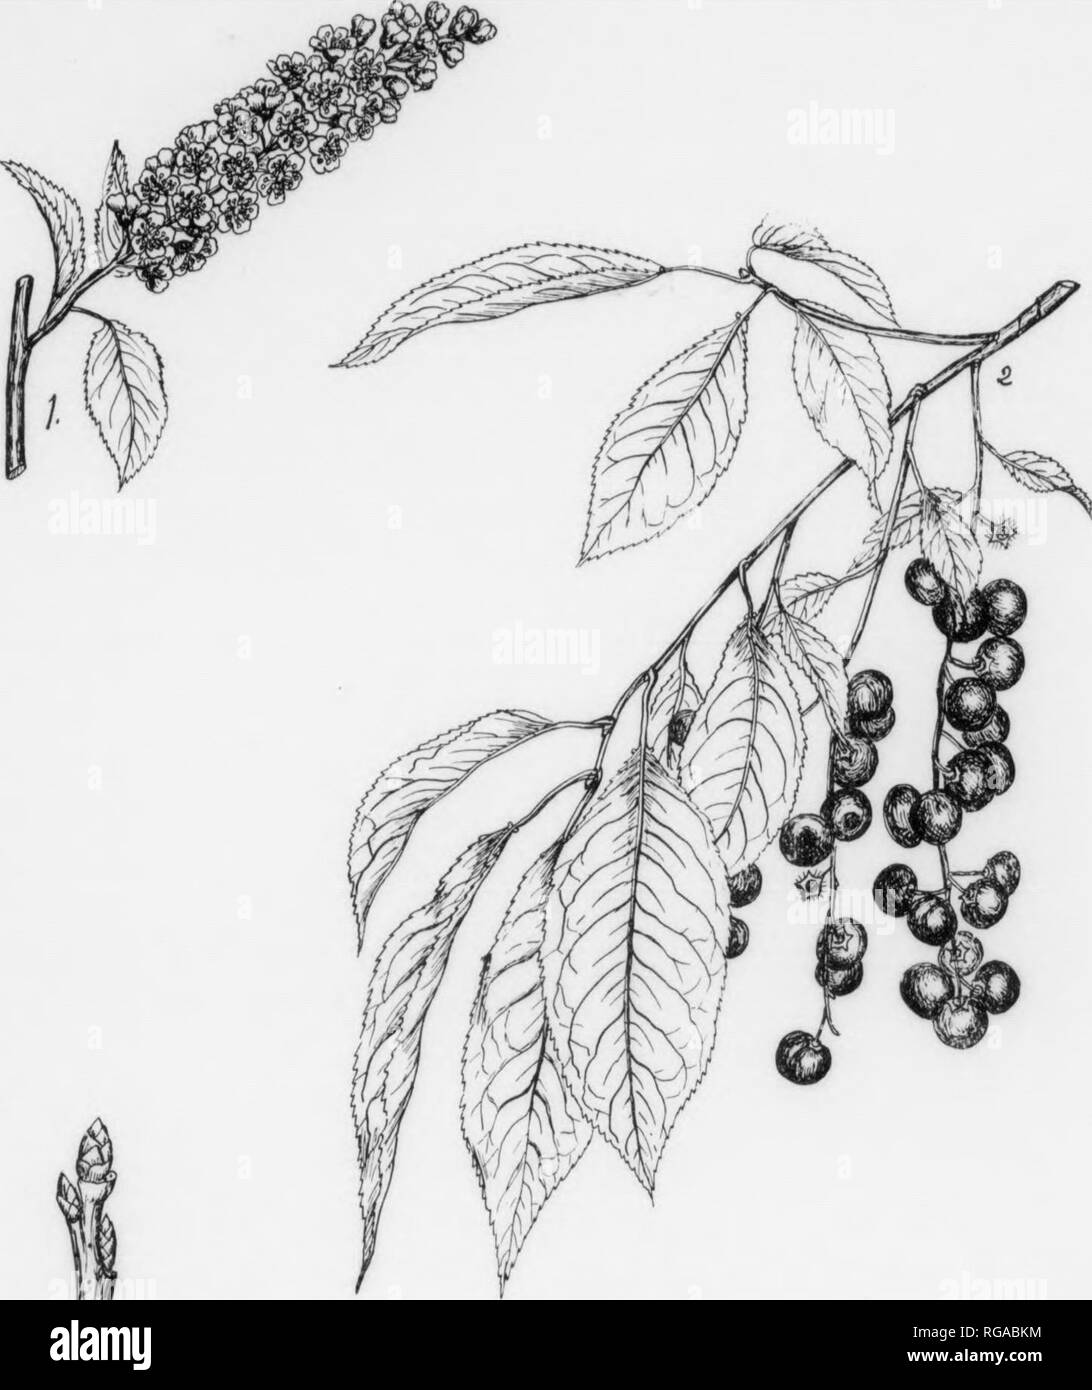 . Bulletin (Pennsylvania Department of Forestry), no. 11. Forests and forestry. 166 WILD BLACK CHERRY. Prunus serotina, Ehrhart.* FOEM—UPually reacbeR a height of 50-76 ft. with a diameter of 2-8 ft., but may attain a height of 110 ft. with a diameter of 5 feet. In forest grown specimens the trunk is usually long, clean, and with little taper, while in open grown specimens it is usually short. Crown rather Irregularly-oblong. BARK—On young trunks (Pig. 96) rather smooth, glossy, reddish-brown, marked with conspicuous-white horizontally-elongated lenticels; peels off in thin film-like layers, a Stock Photo